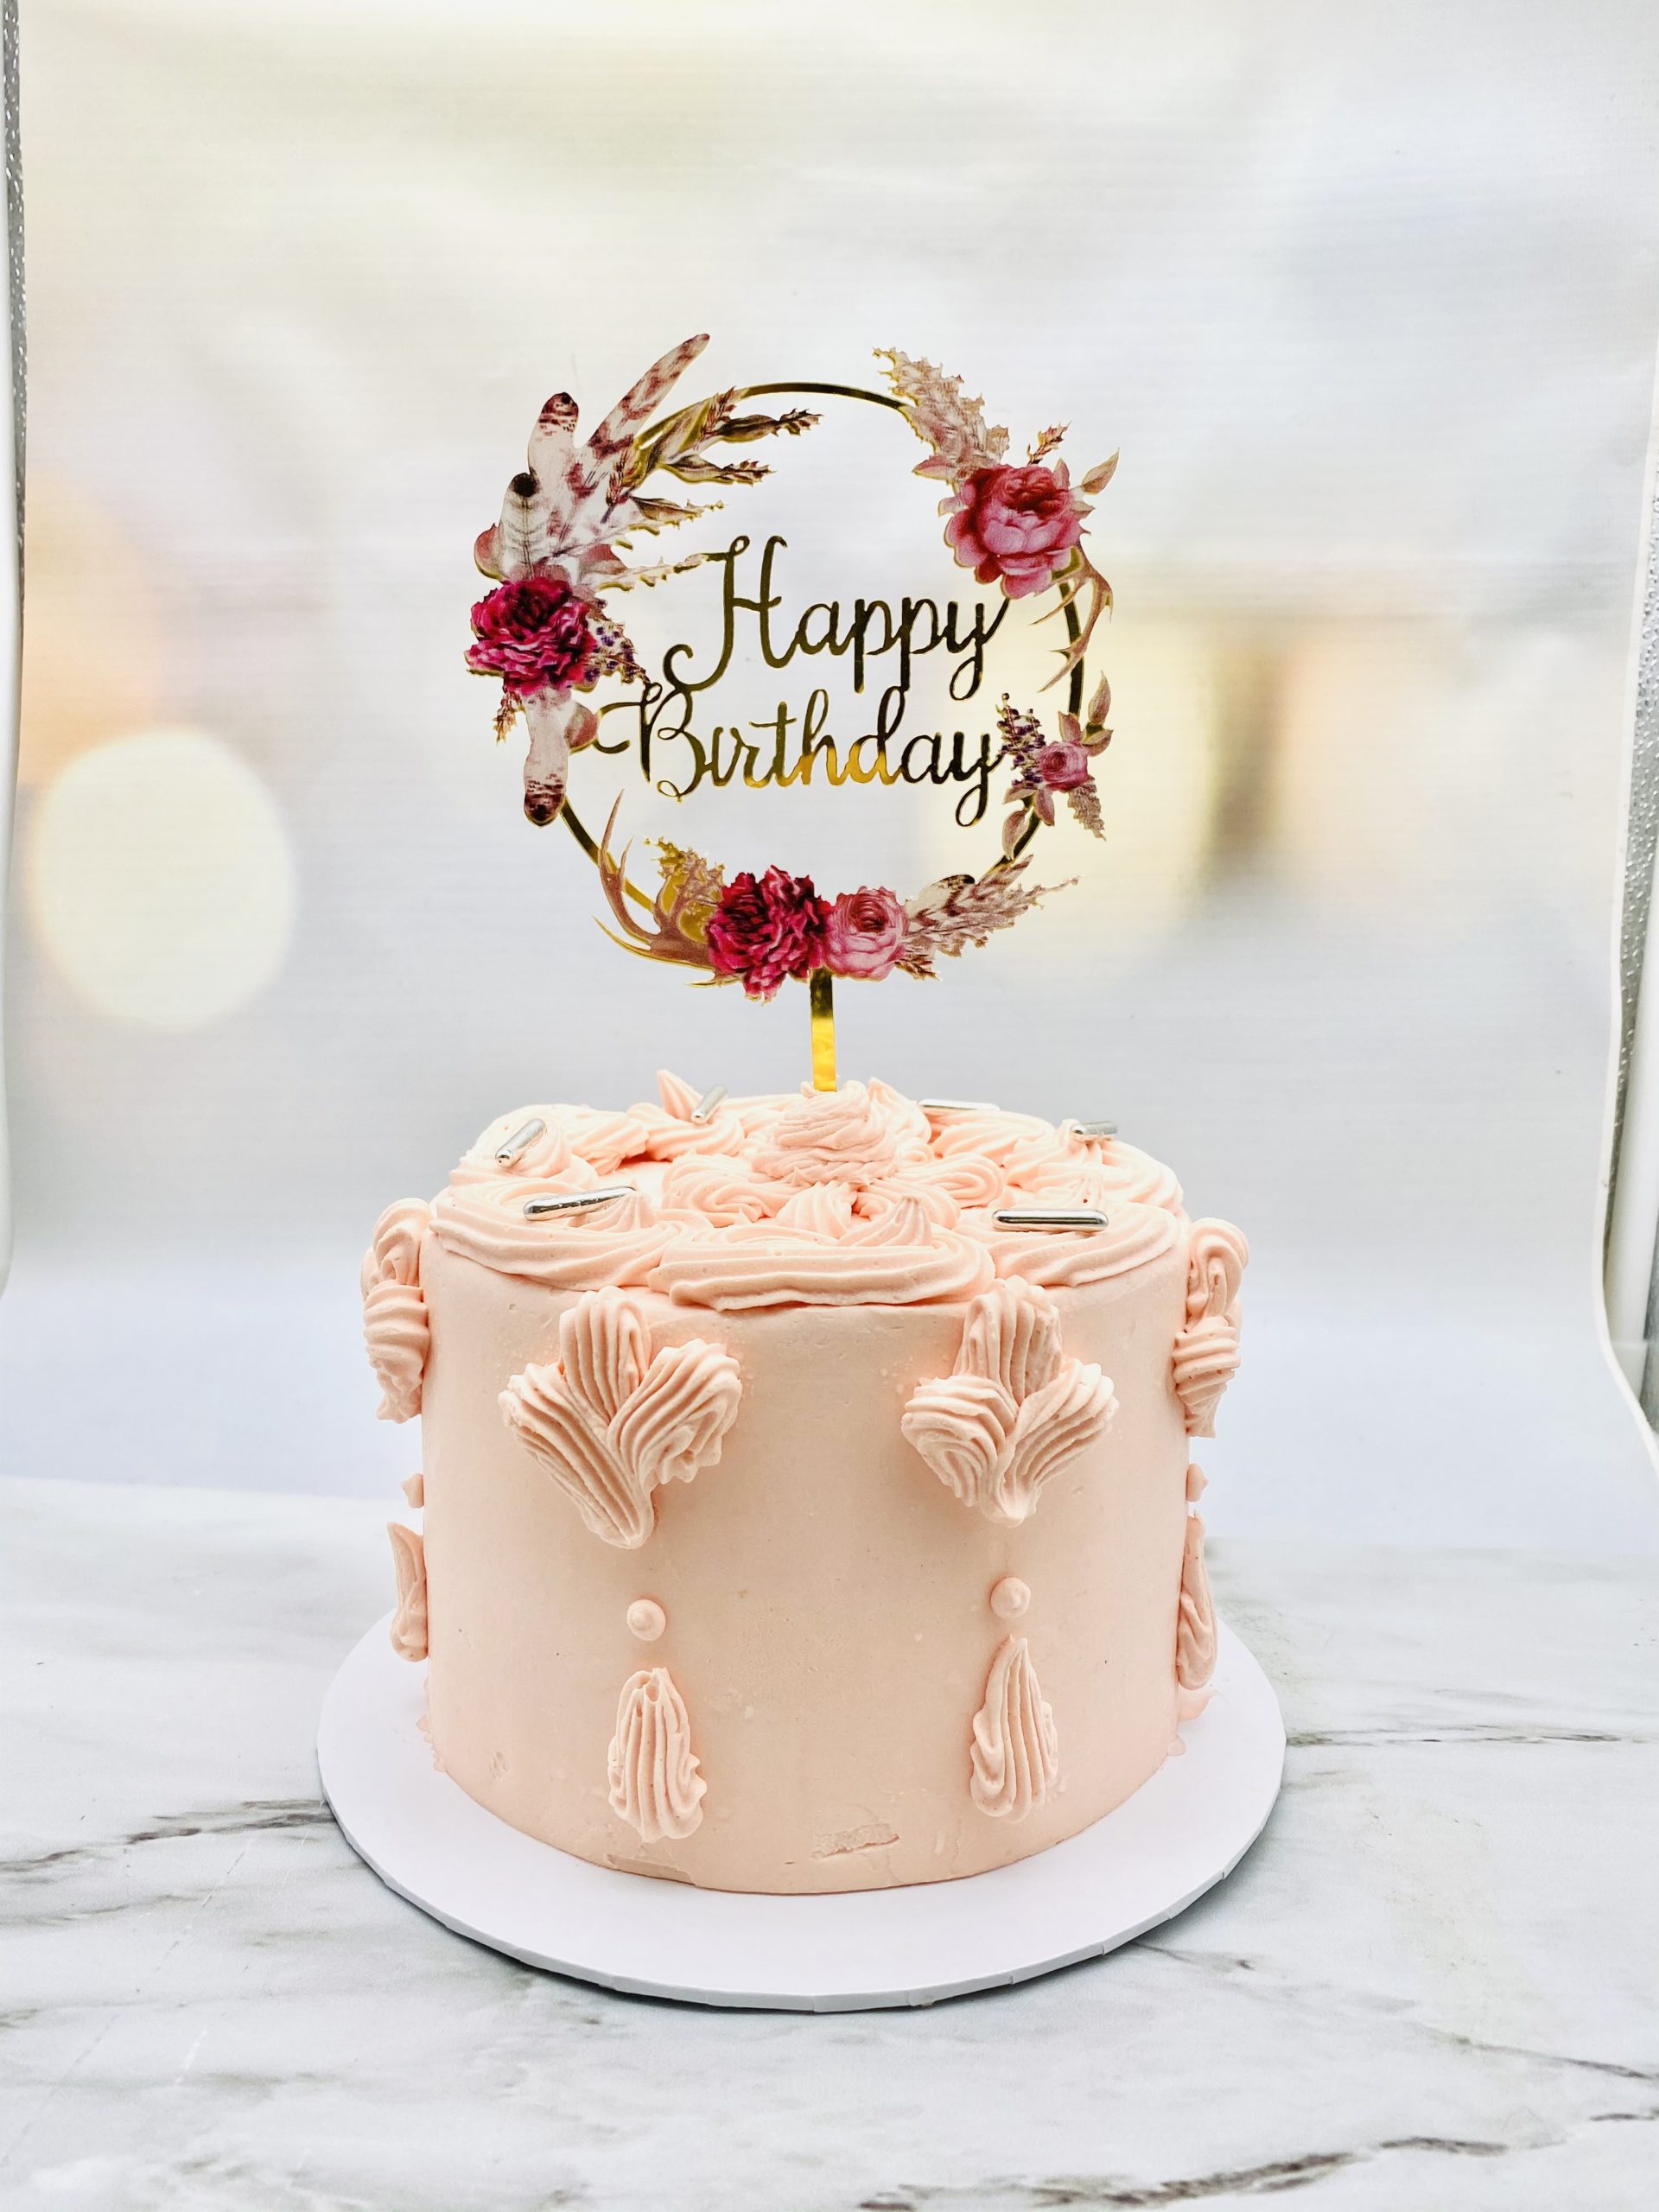 Cake Topper ,,Romantic Birthday” | Style Your Cake